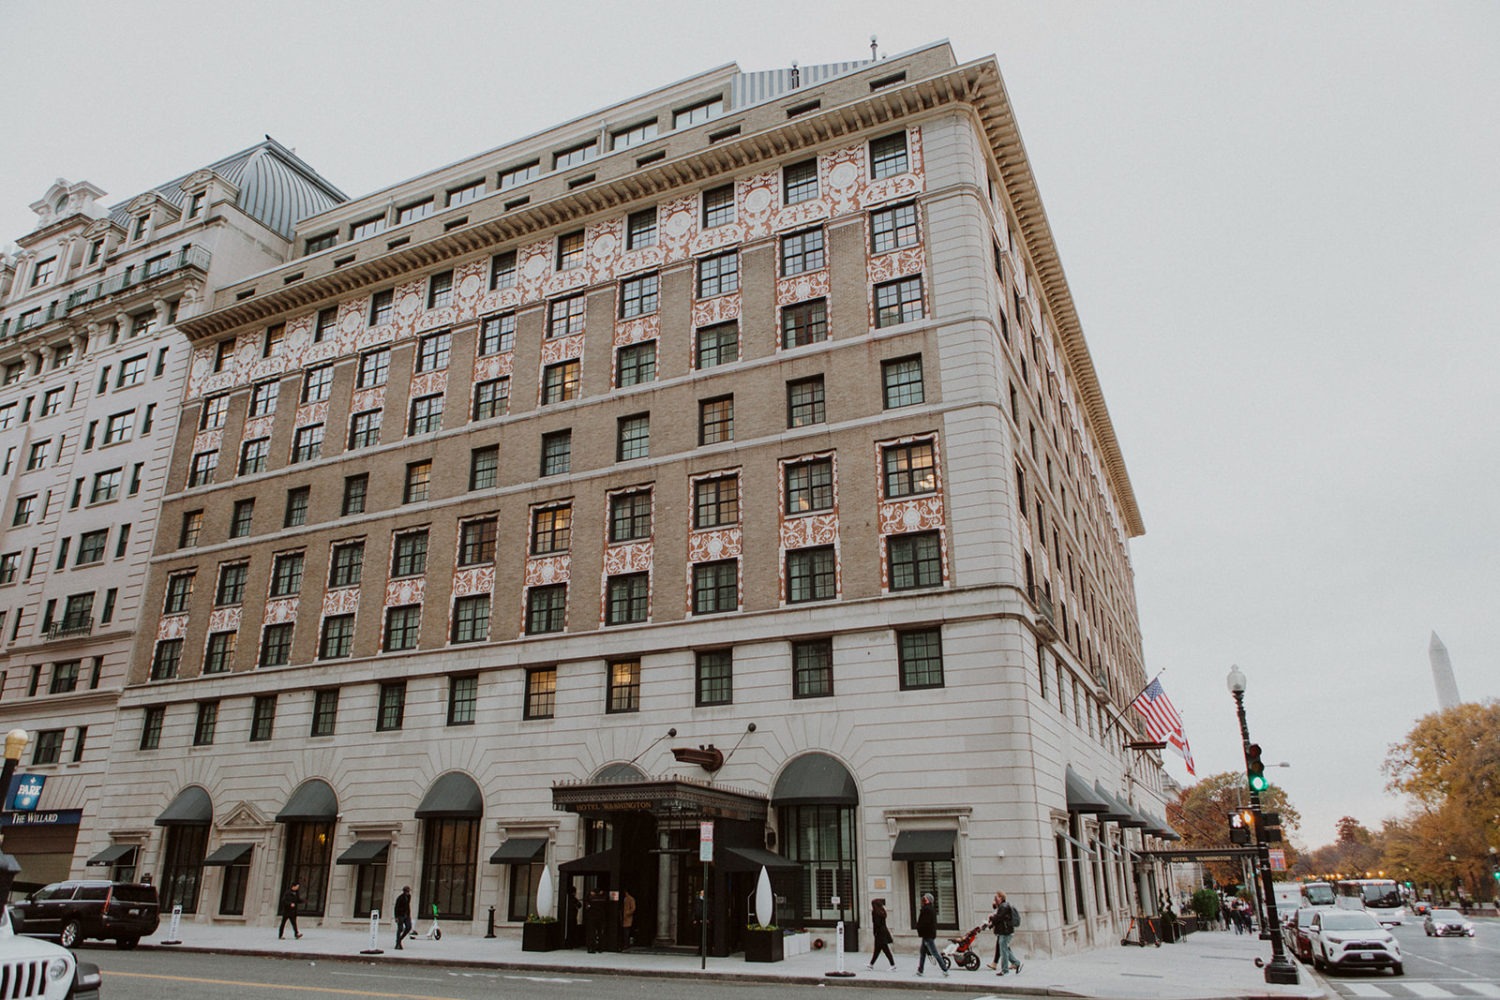 Hotel Washington exterior: one of the best wedding venues in dc